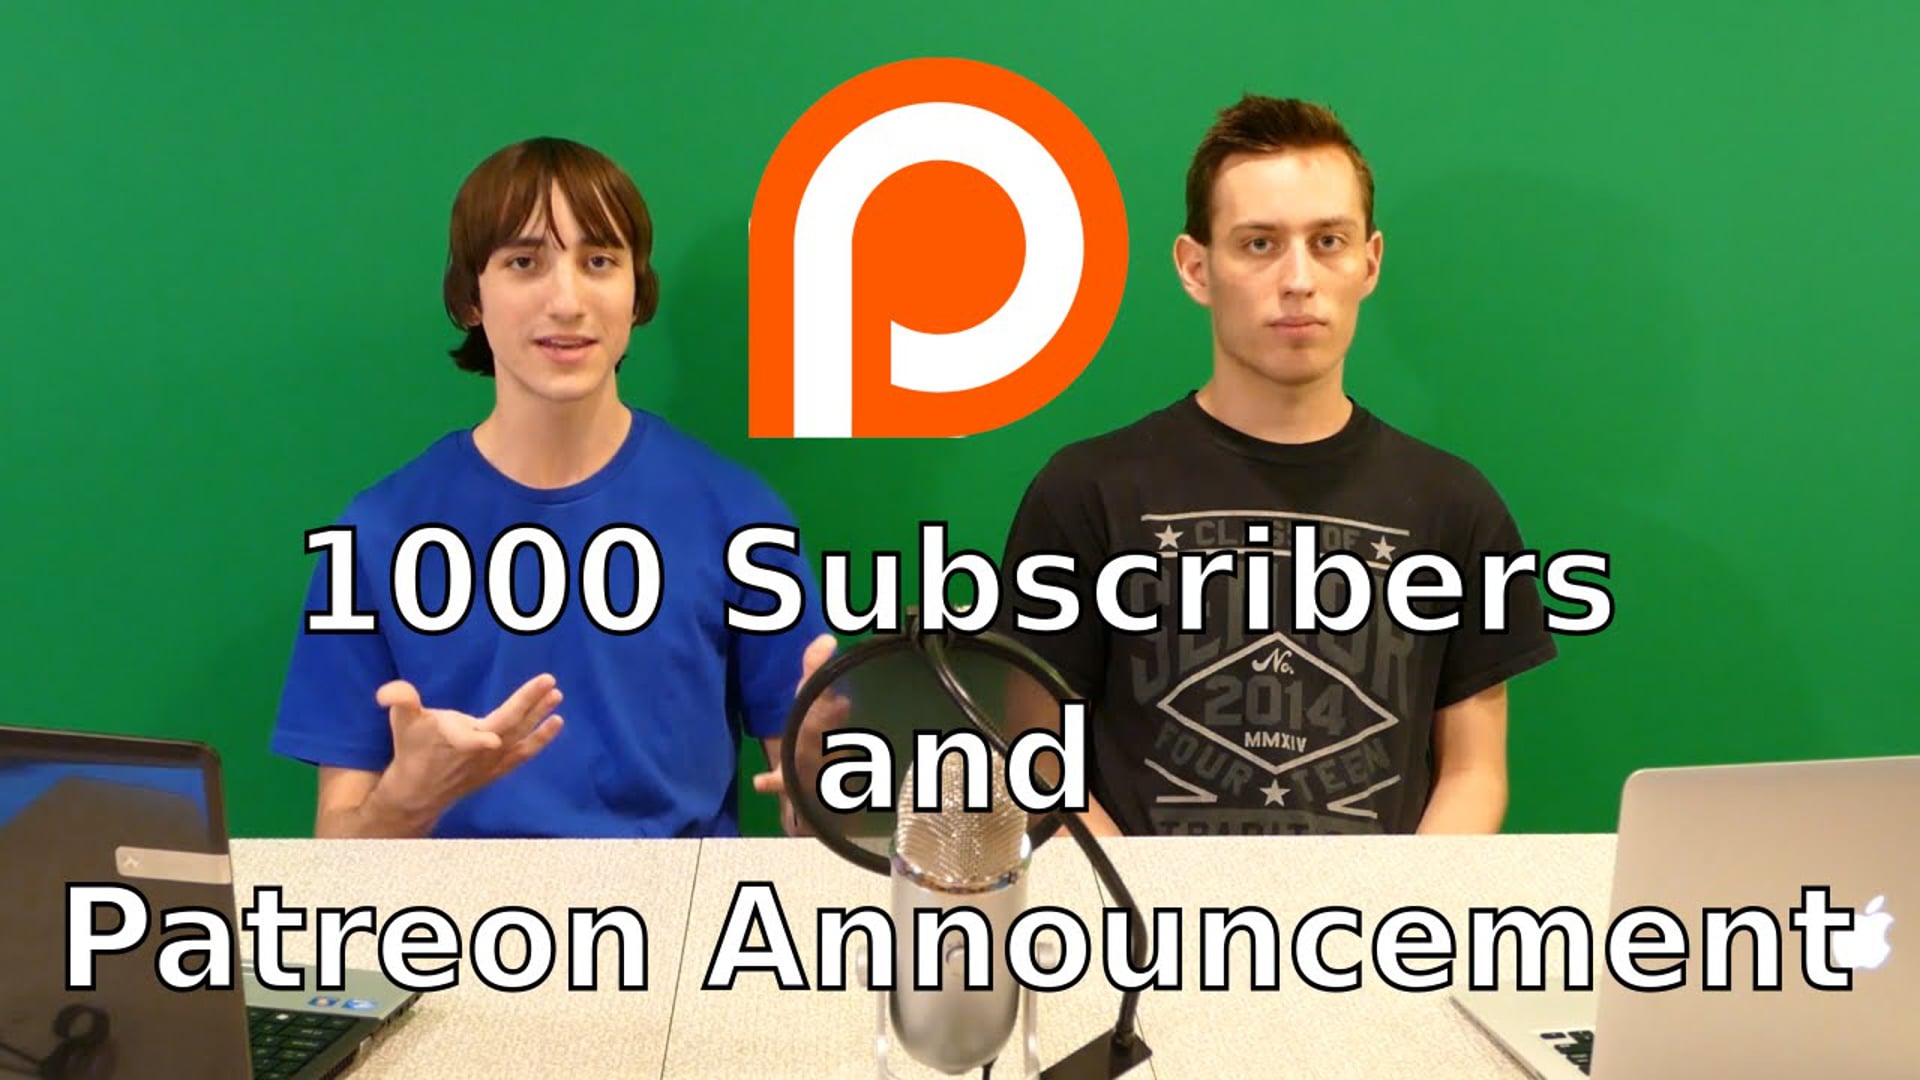 1000 Subscribers & Patreon Announcement